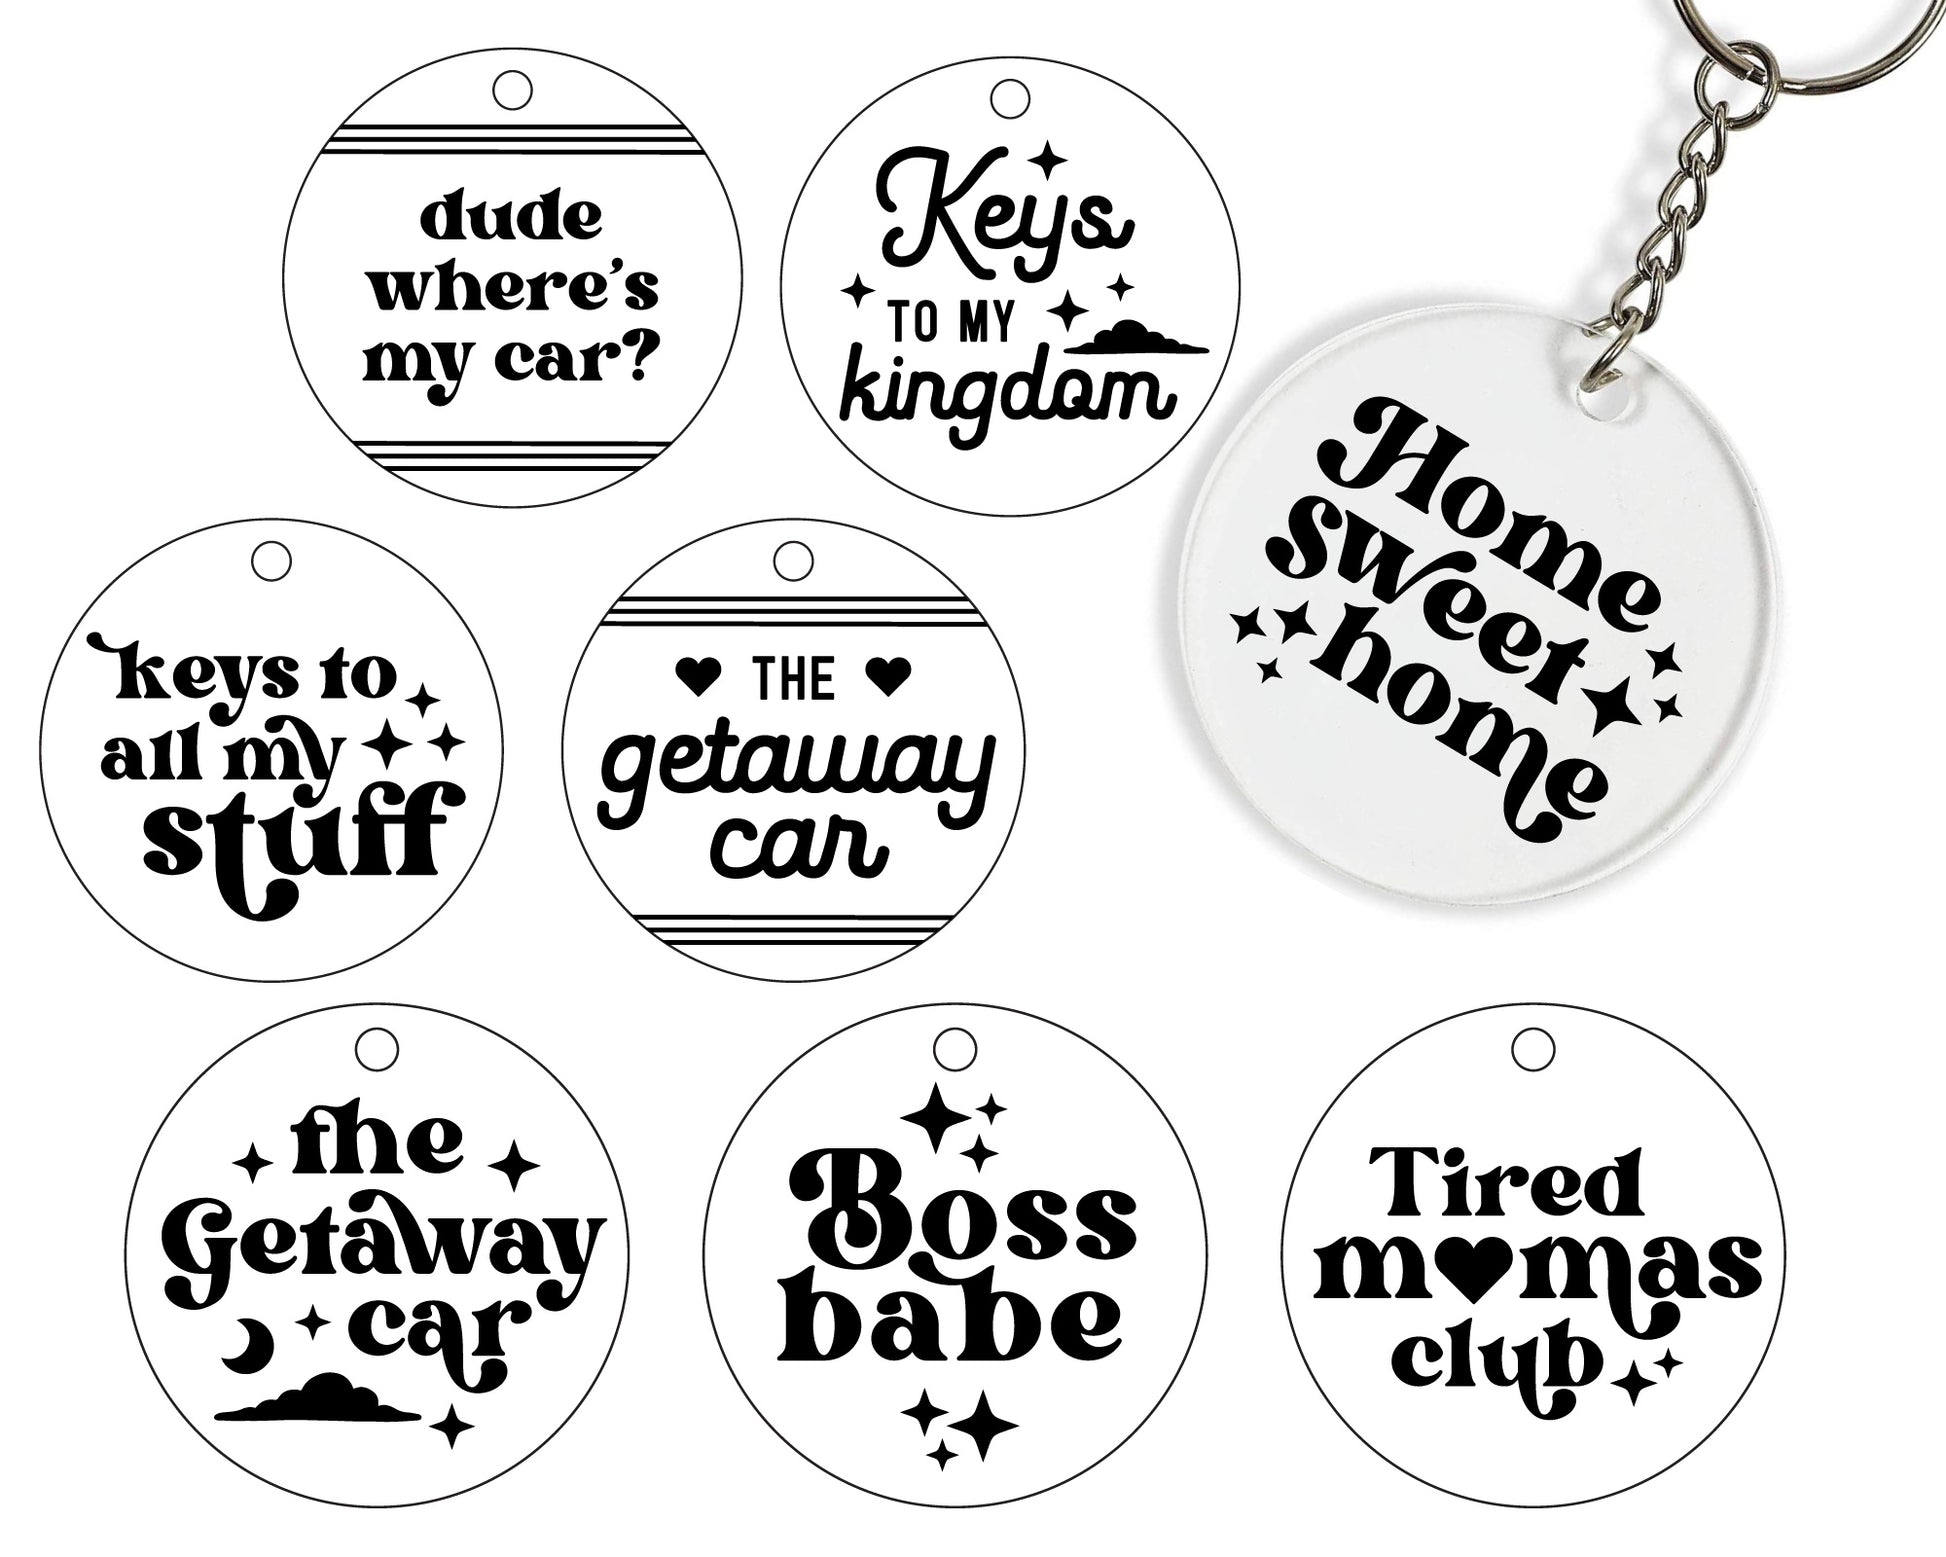 Funny Quote for Keychain SVG Bundle Round Keychain SVG Key Chain